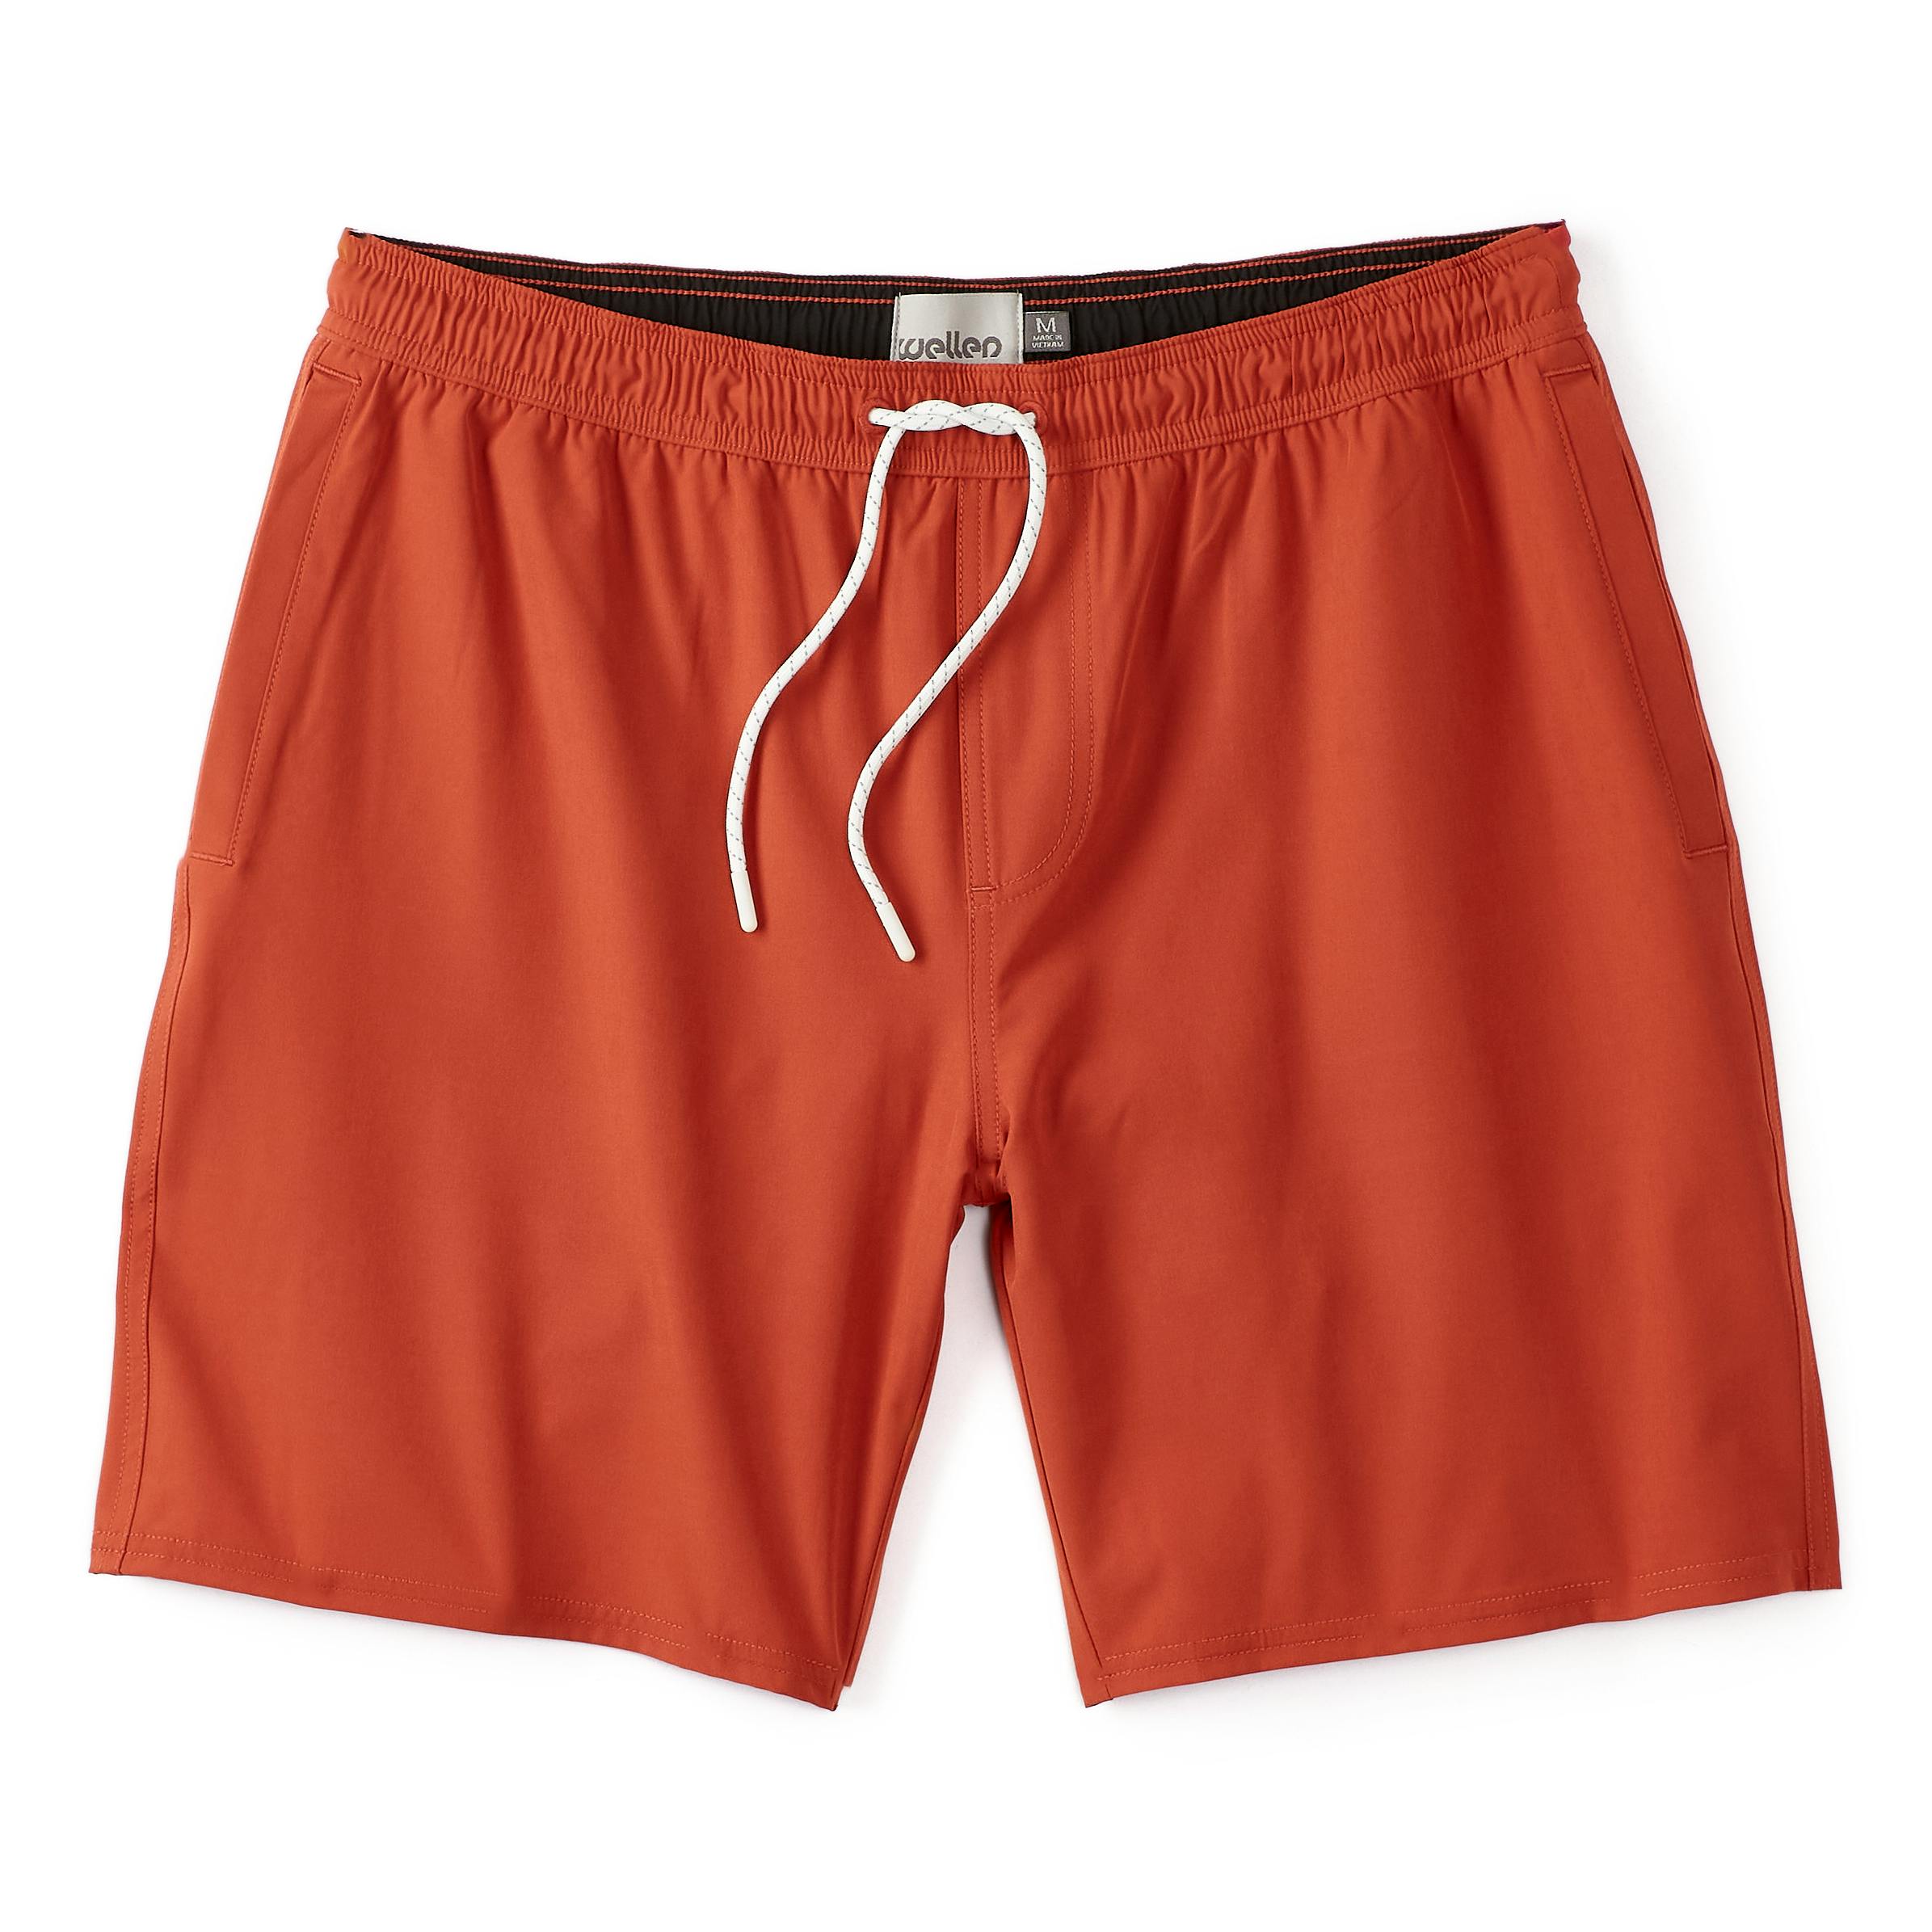 Wellen Performance Lined Swim Trunks - 7 - Solid Red